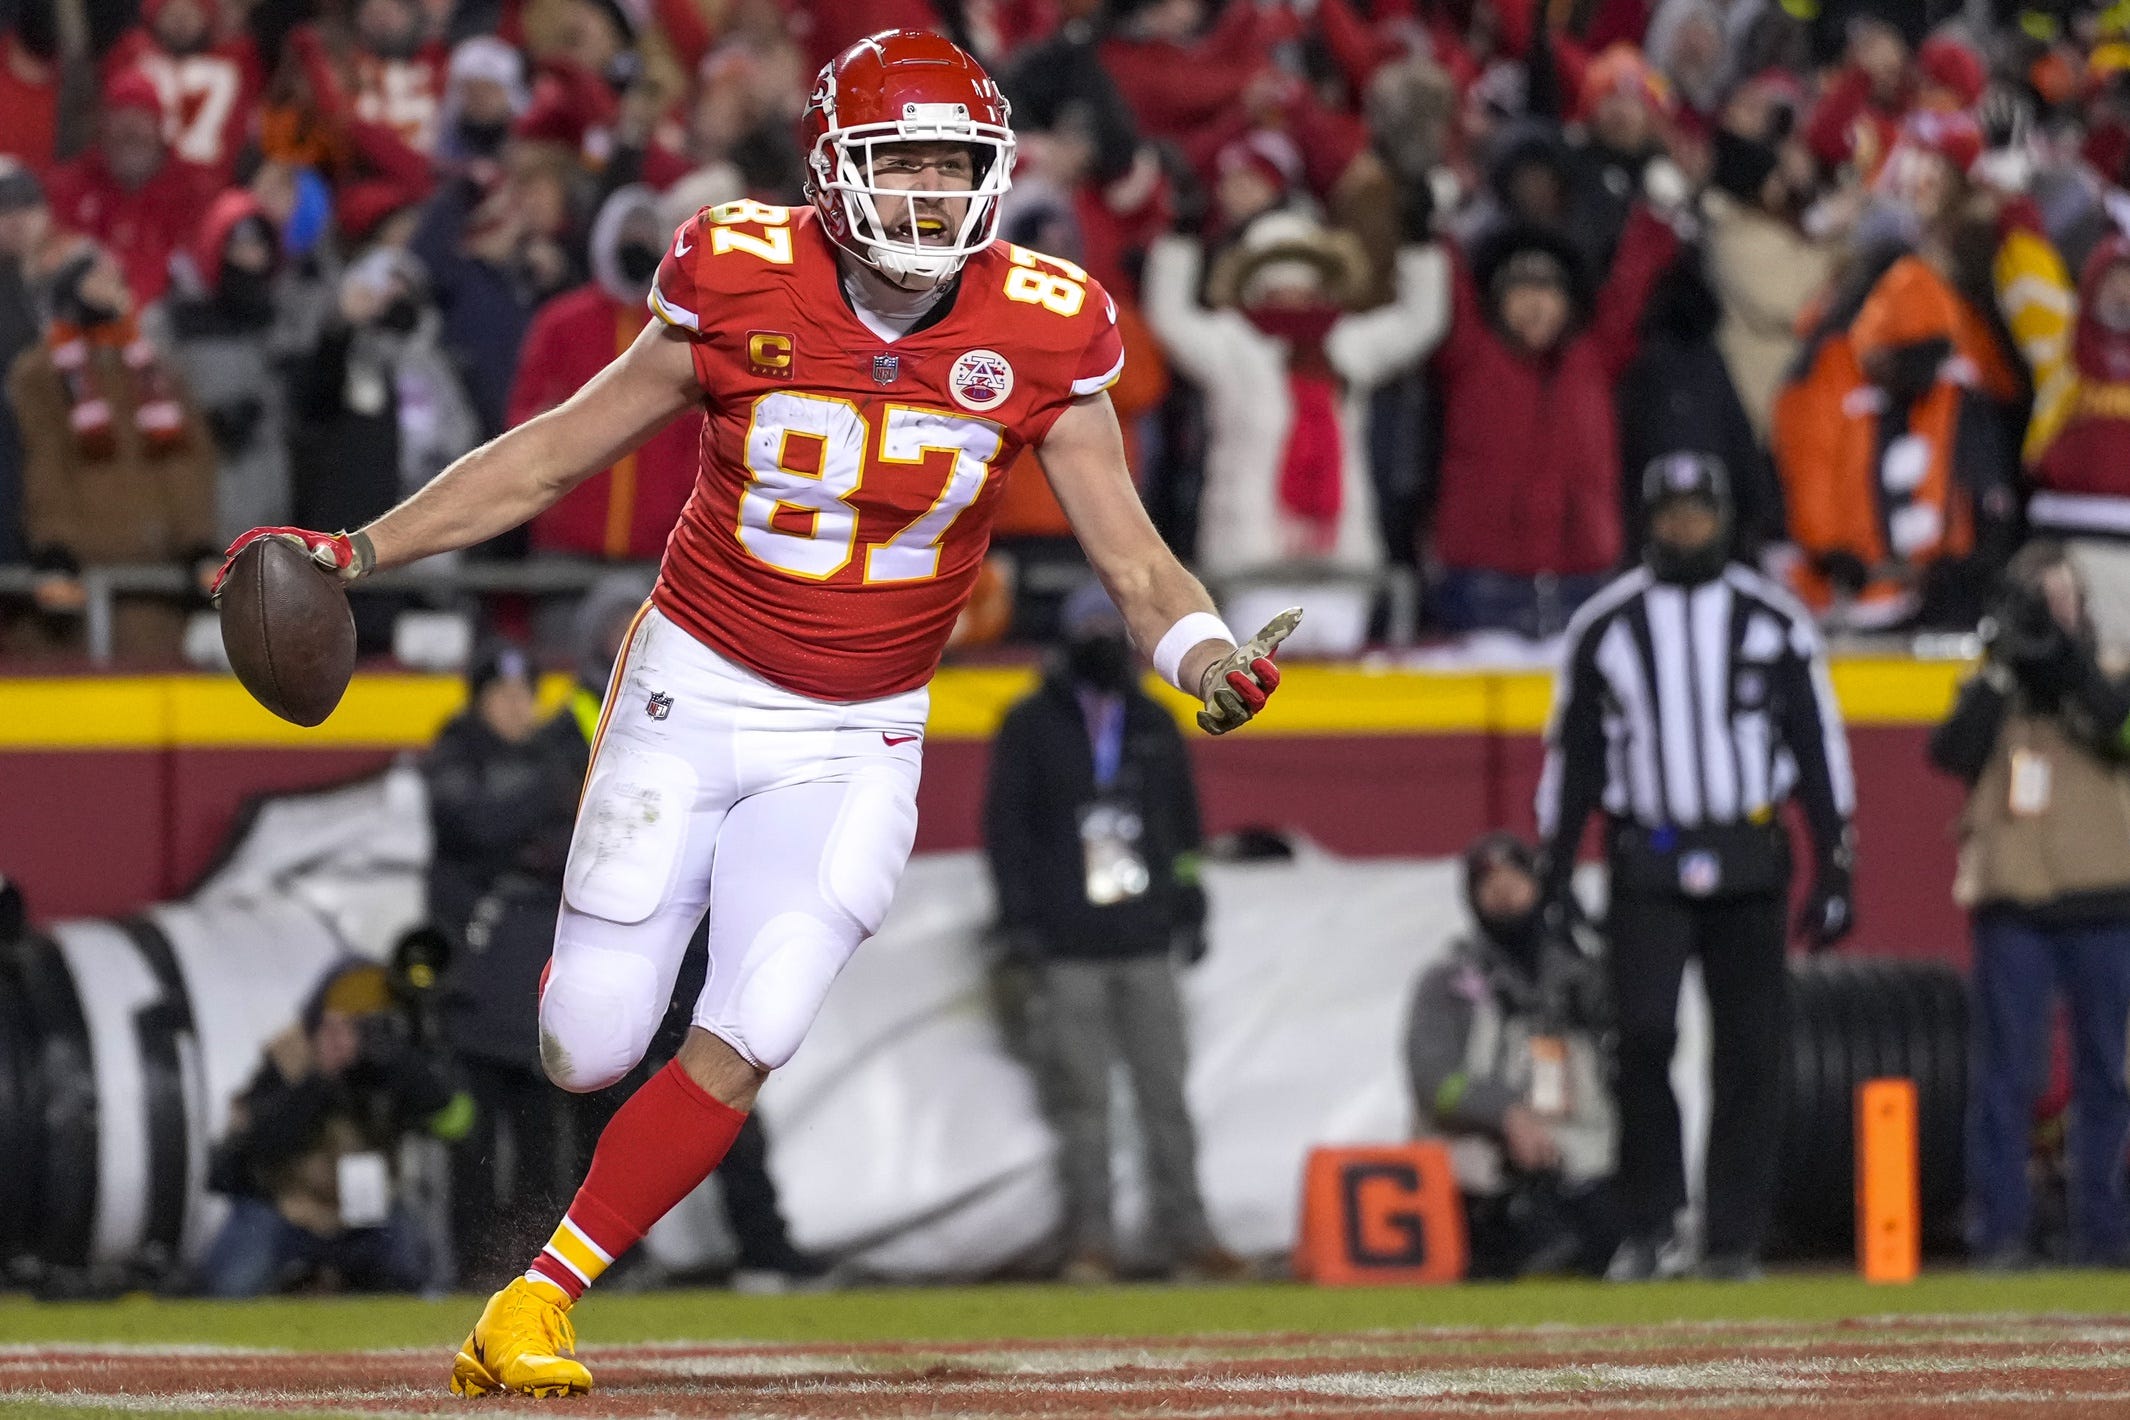 NFL At age 32, Chiefs tight end Travis Kelce posted career highs last season in receptions (110) and touchdowns (12).